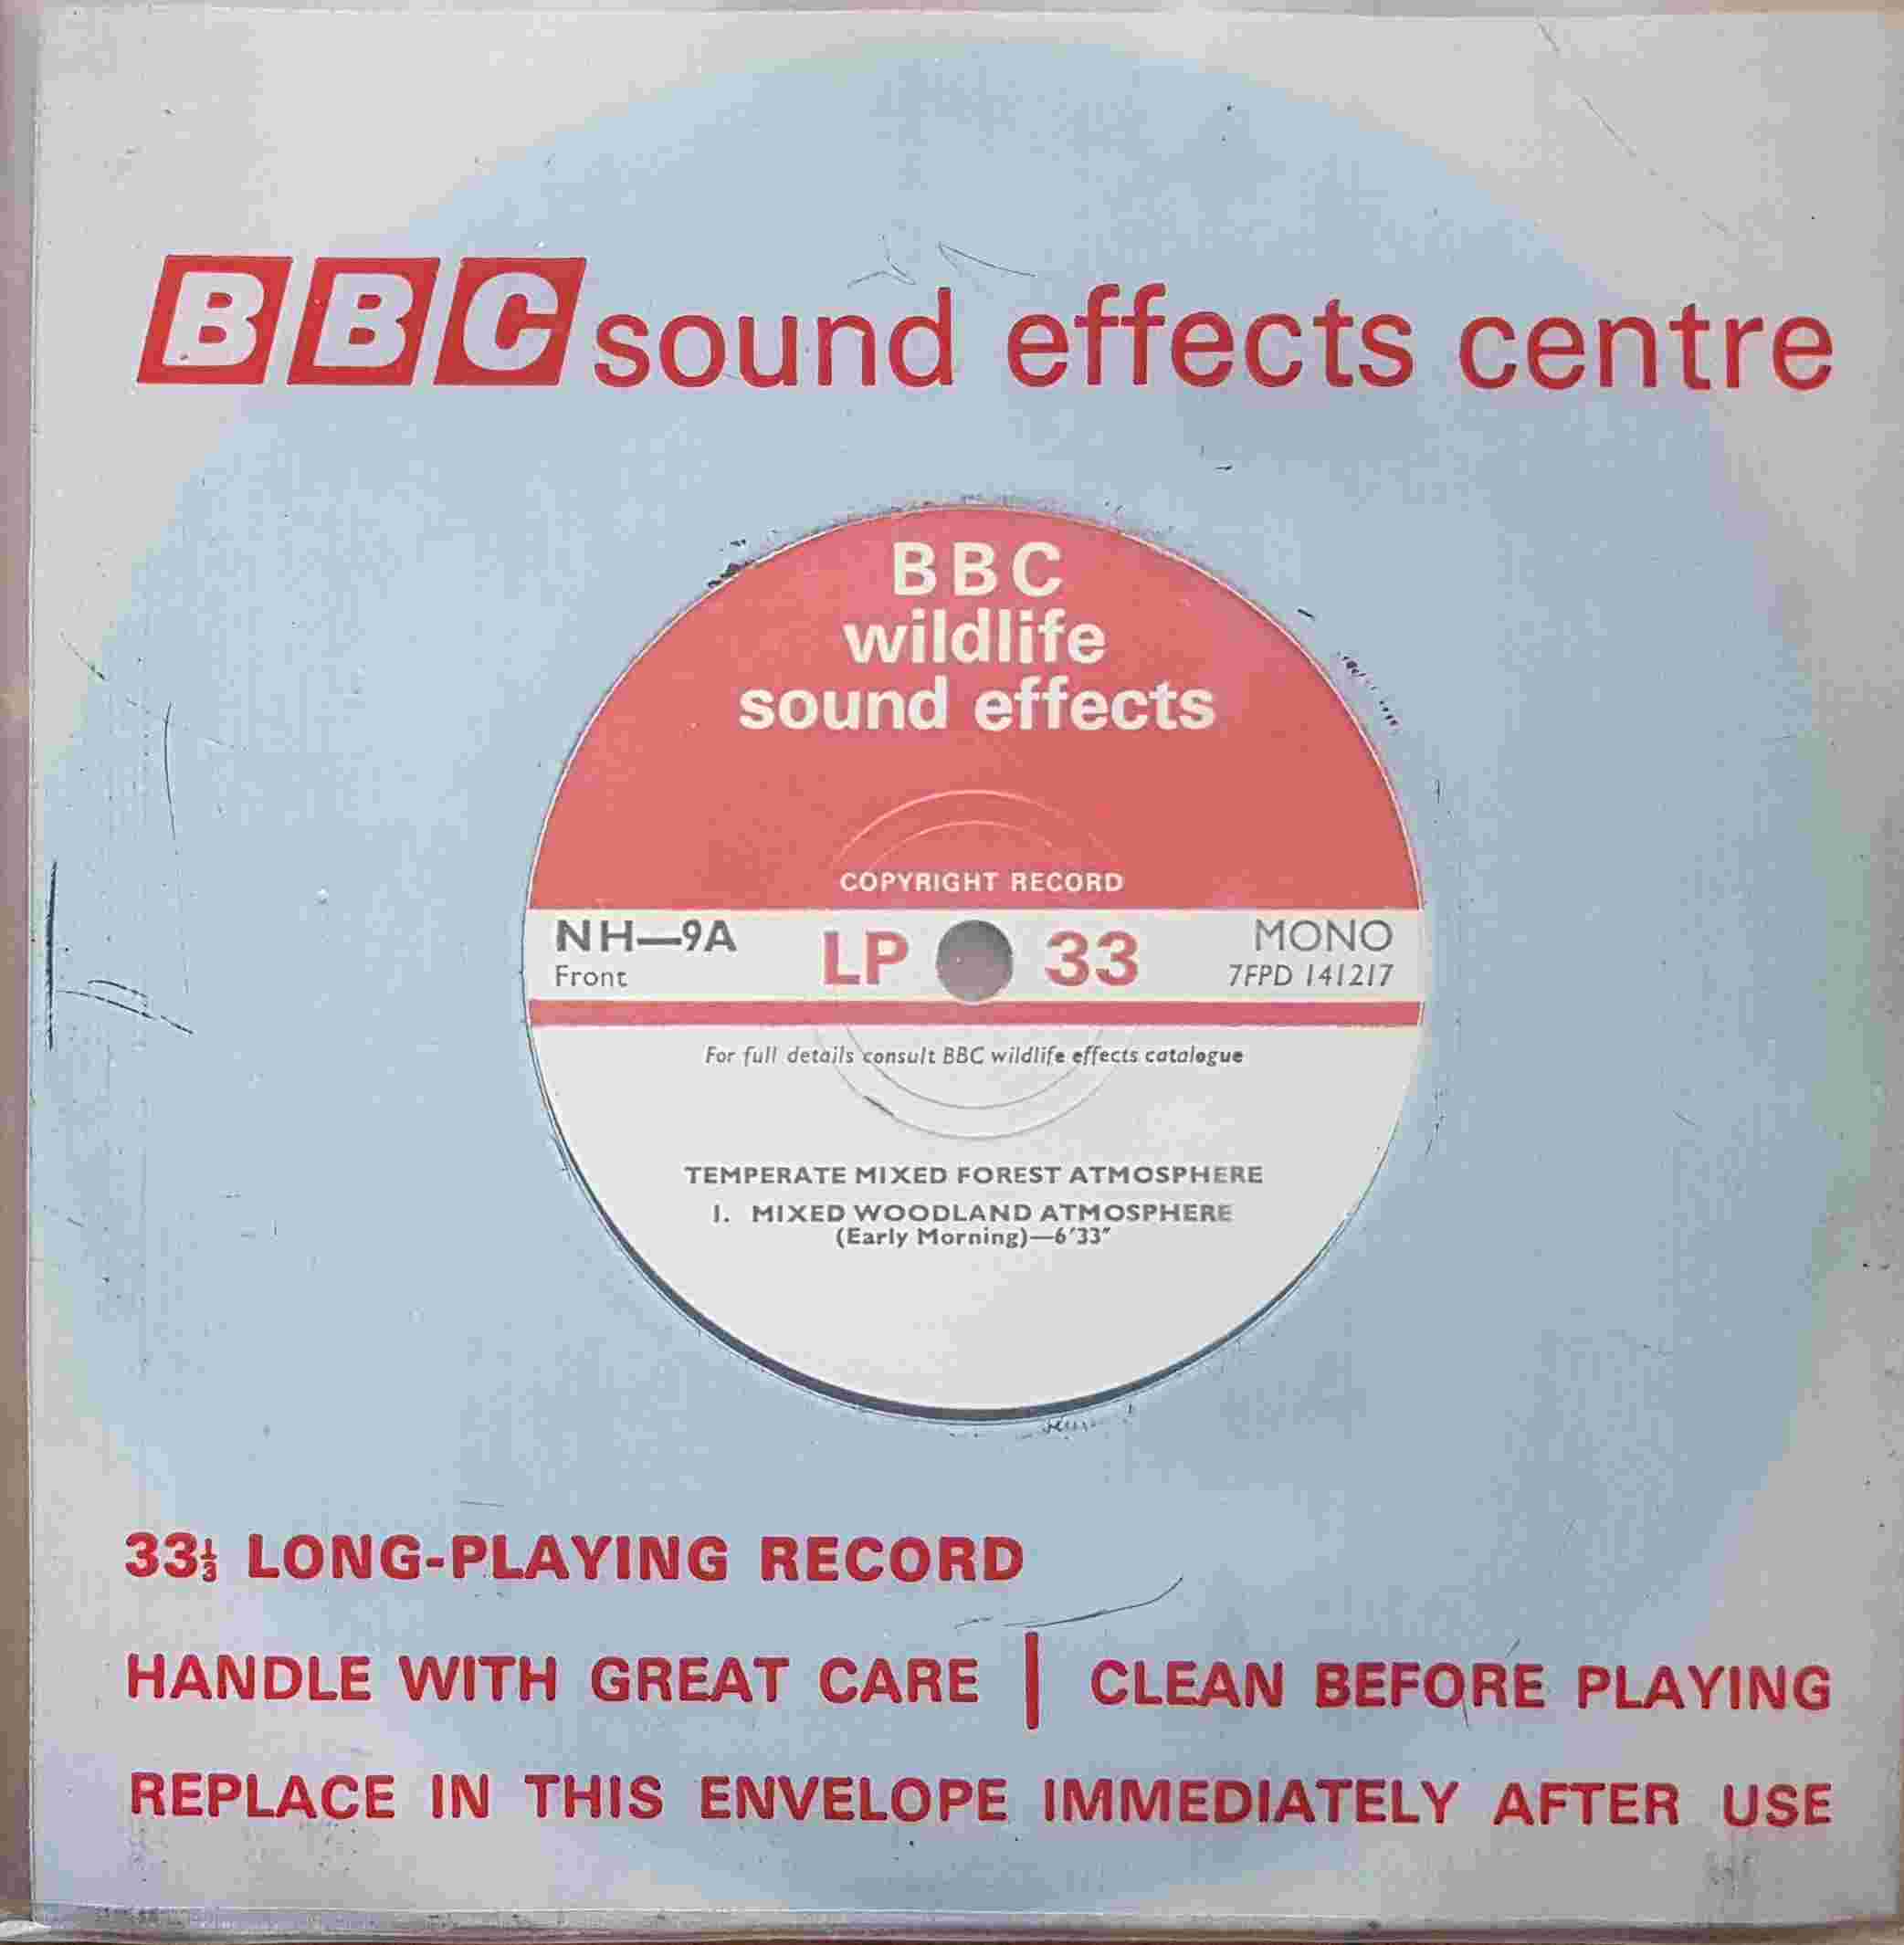 Picture of NH 9A Temperature mixed forest atmosphere by artist Not registered from the BBC singles - Records and Tapes library